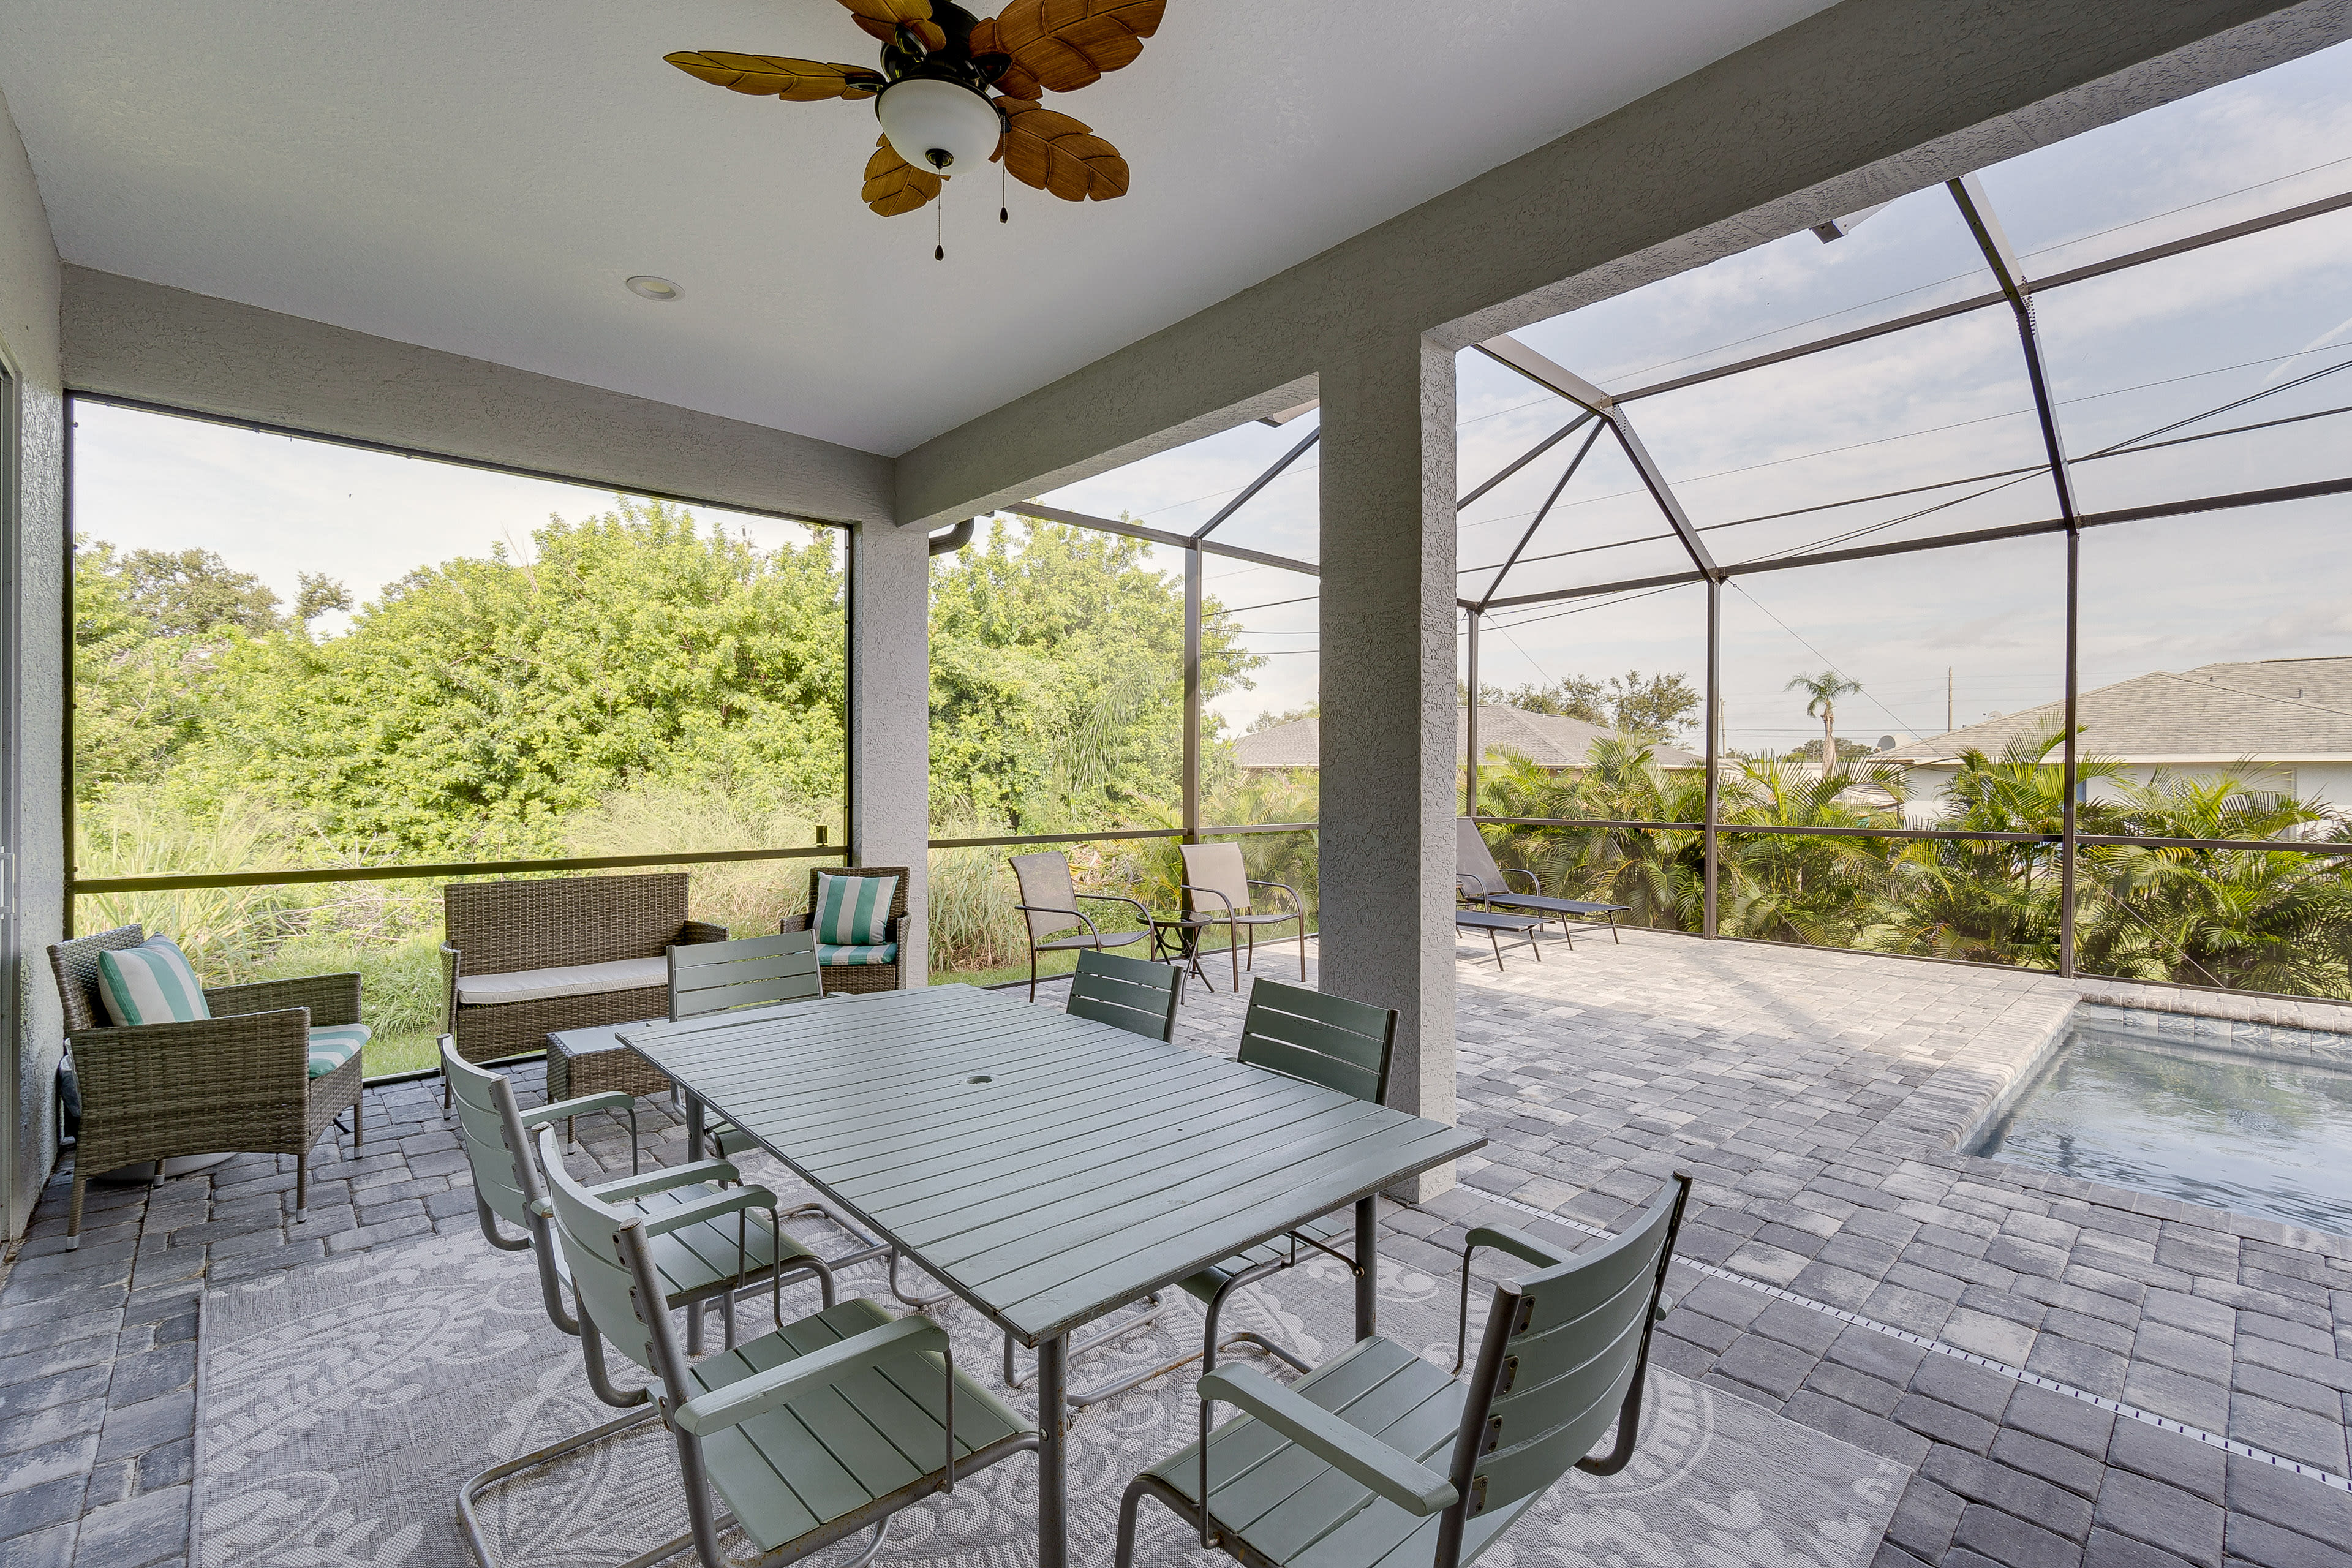 Covered Patio | Outdoor Dining Area